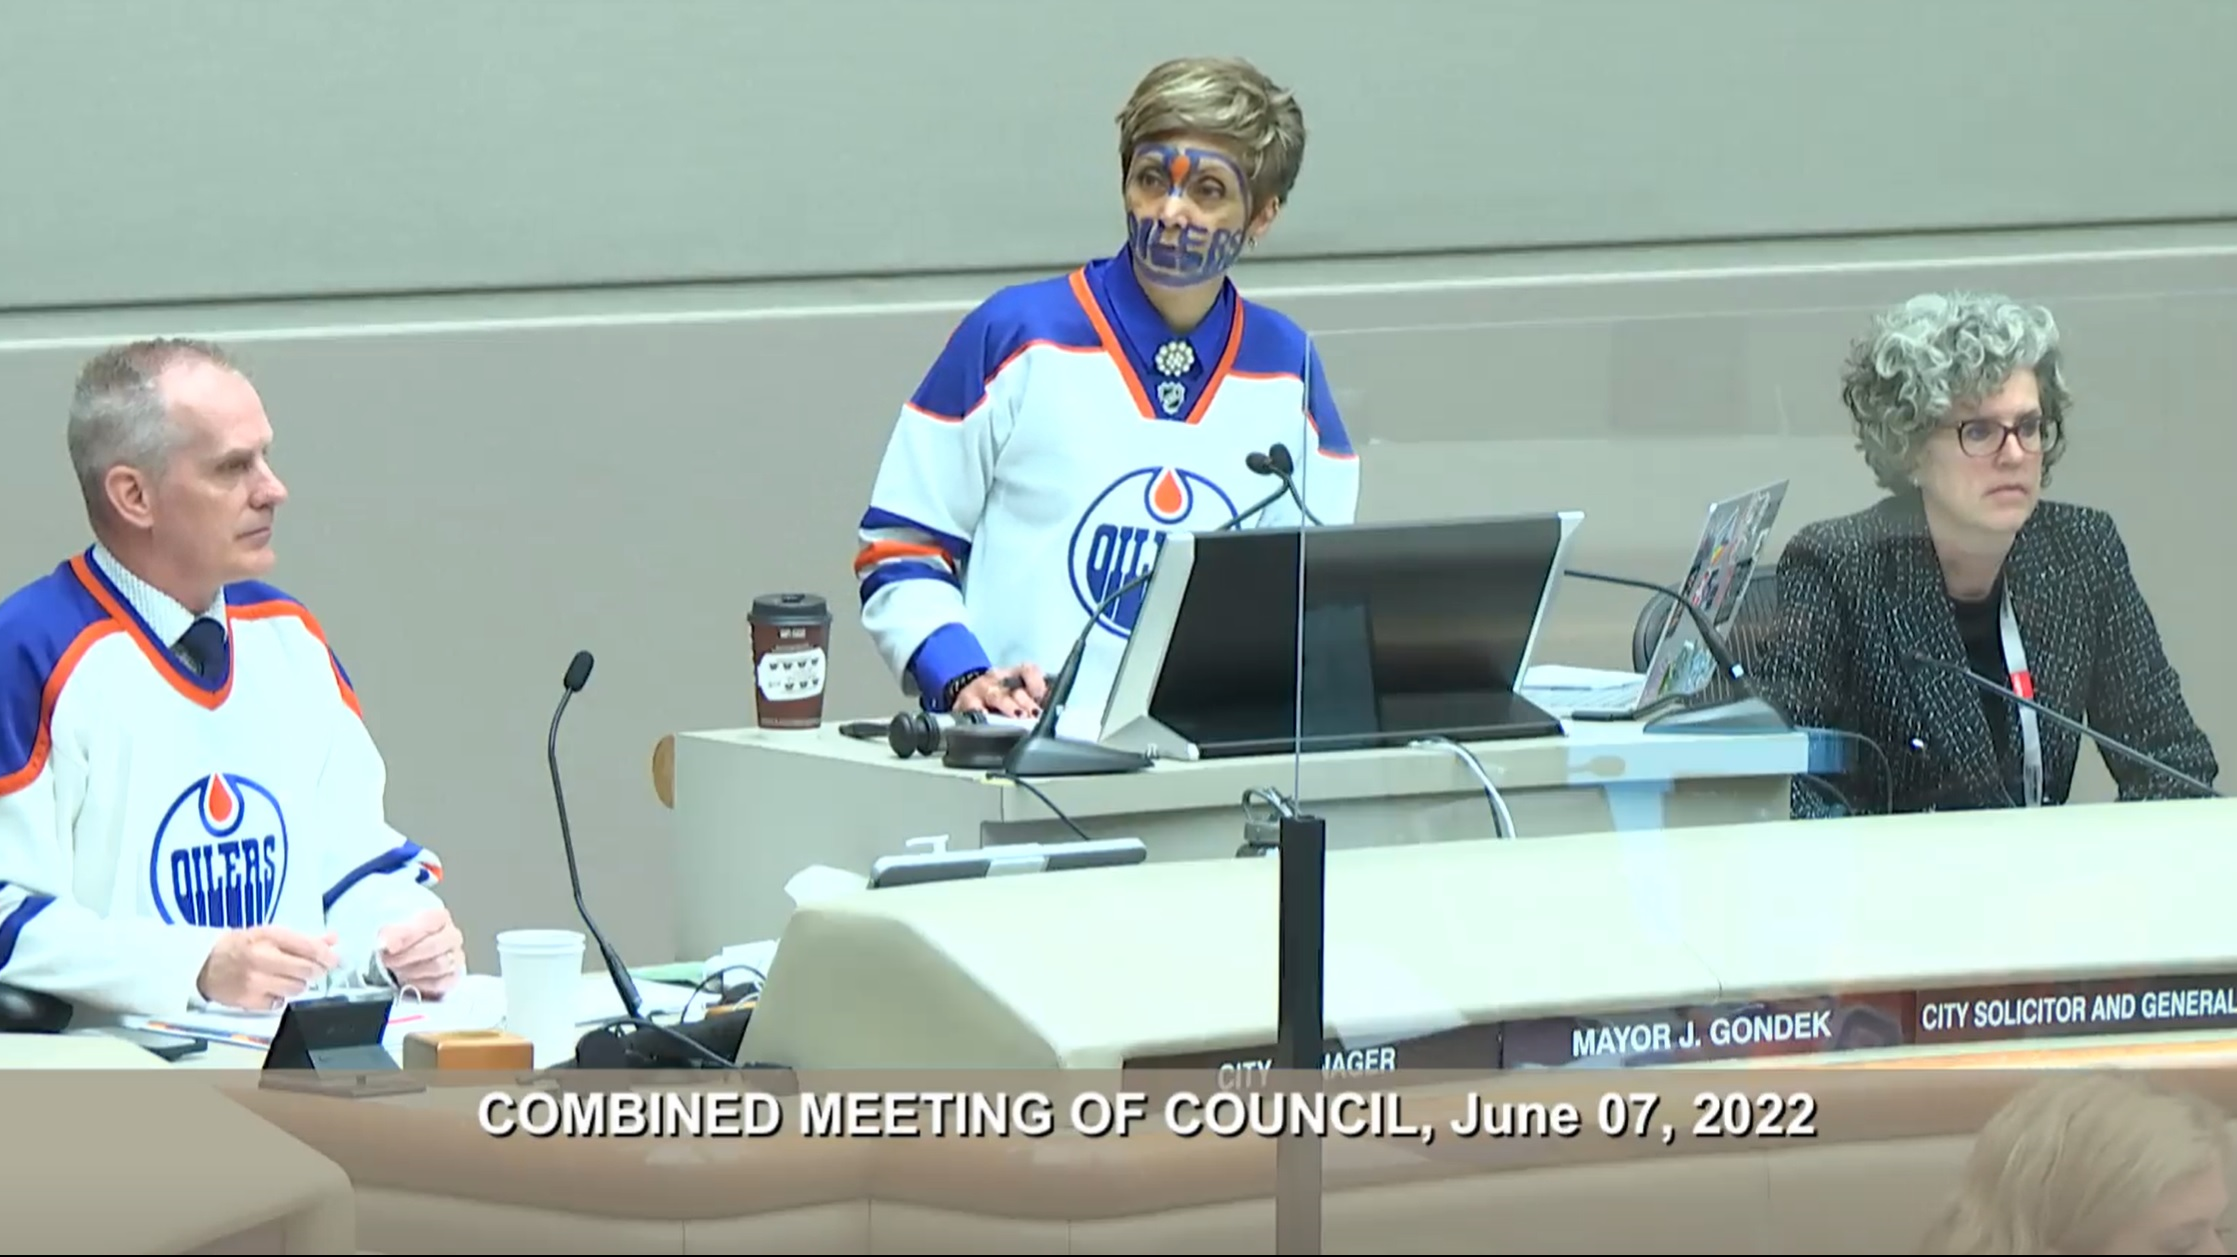 Calgary Mayor Gondek will have to wear Edmonton Oilers' jersey, full  facepaint of team's colours - Indo-Canadian Voice